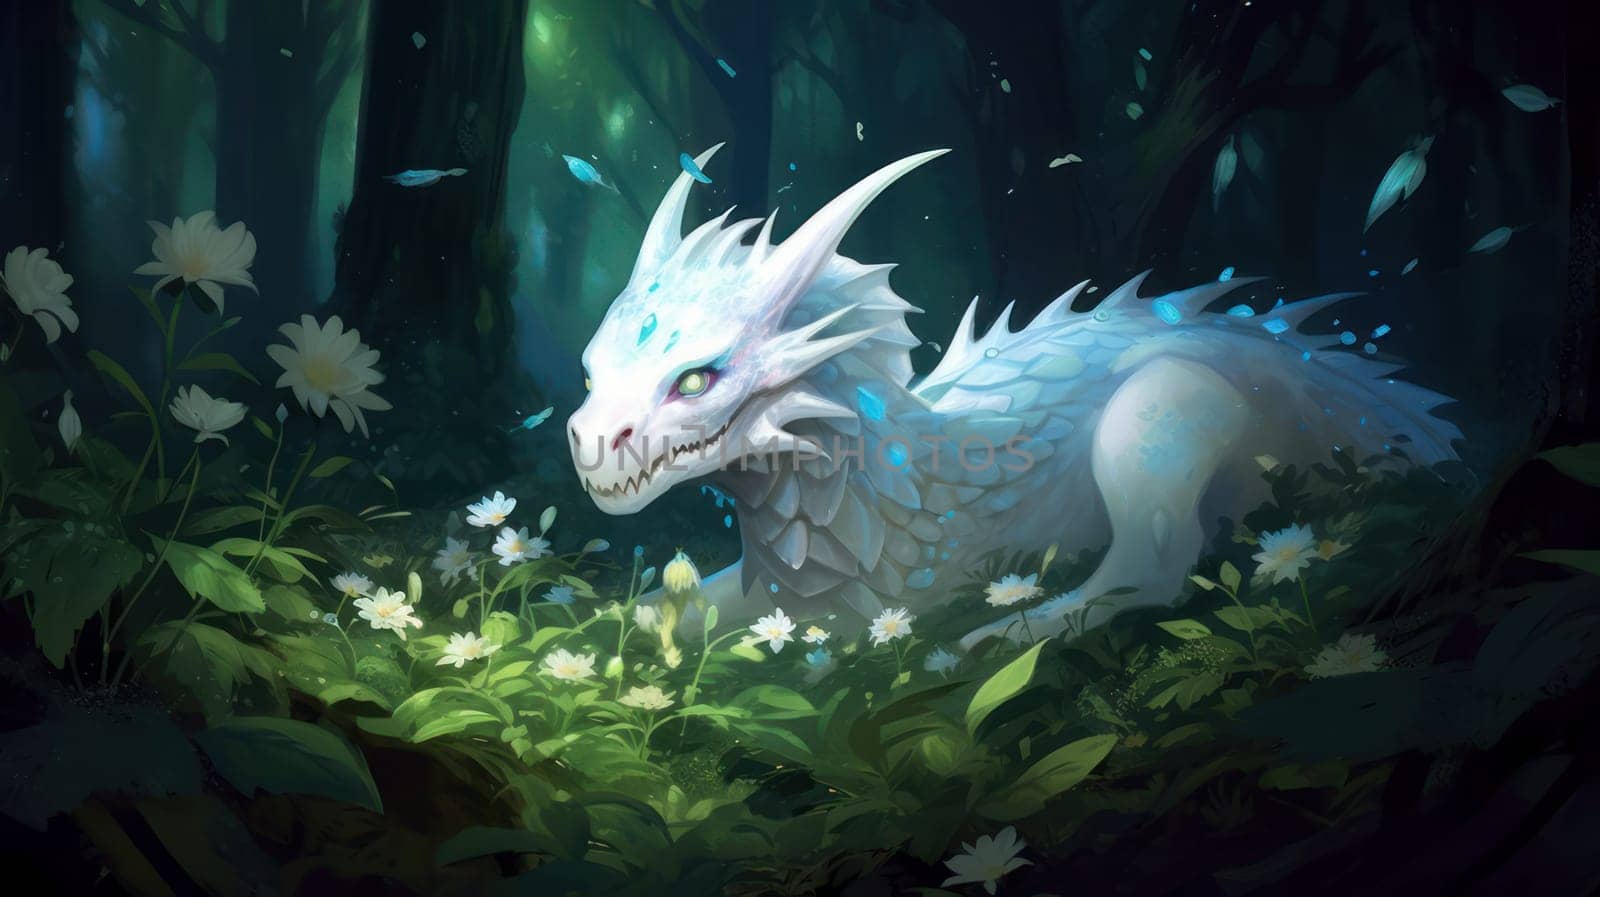 A large, white dragon is a symbol of the new year according to the eastern calendar in the forest. AI generated